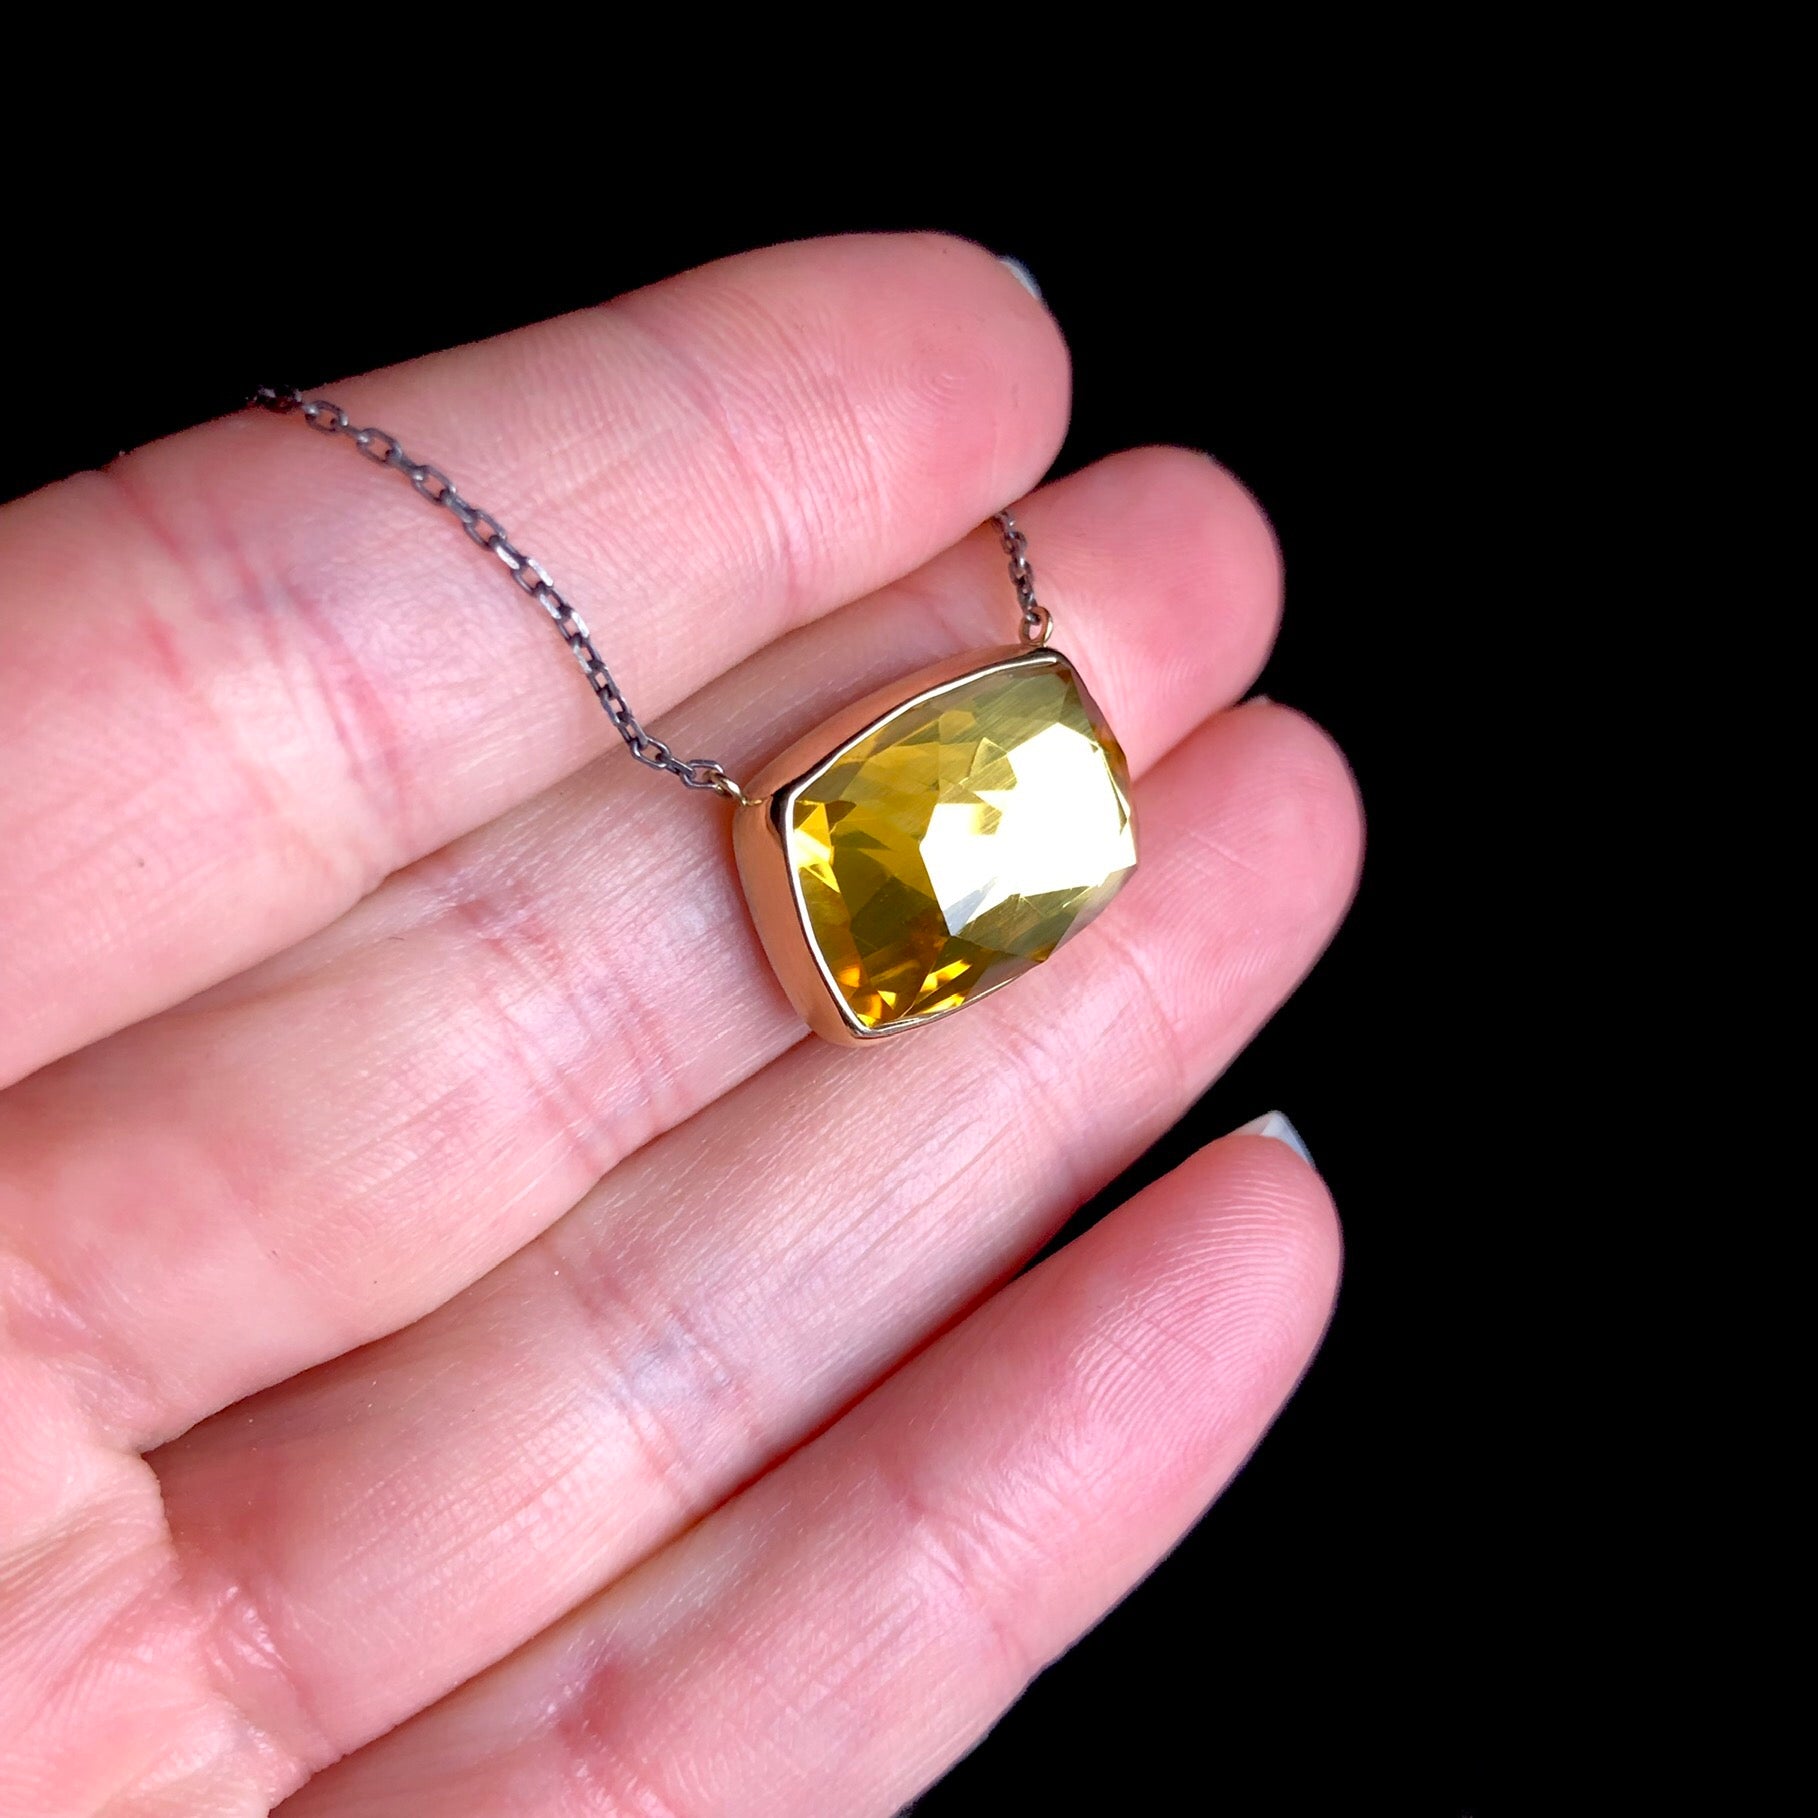 Yellow stone set in gold on blackened silver chain shown in hand